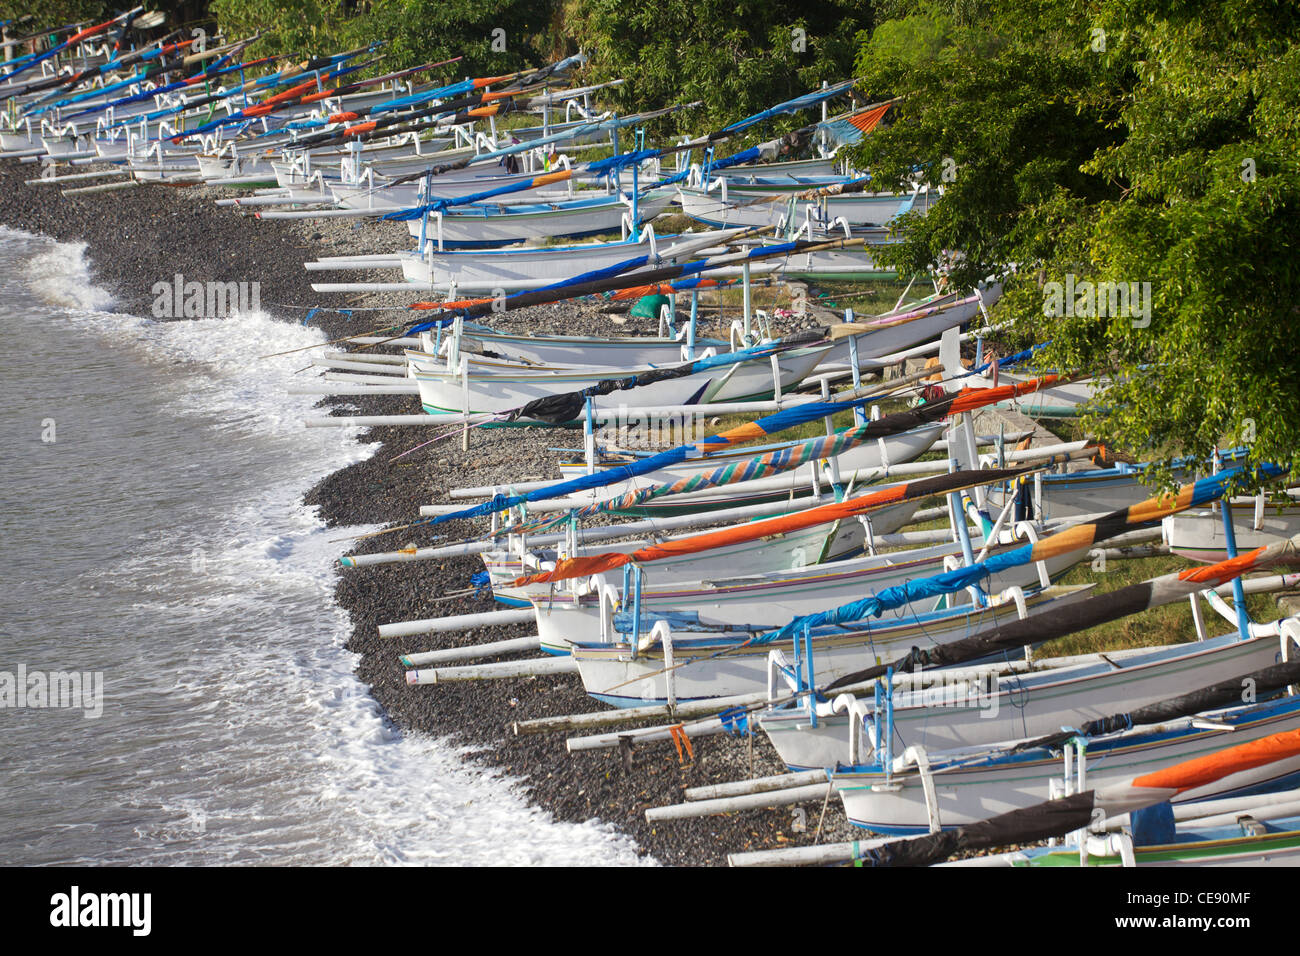 Traditional jukungs (outrigger fishing/sailing canoes) on Amed's 'Japanese Wreck' beach in Eastern Bali. Stock Photo